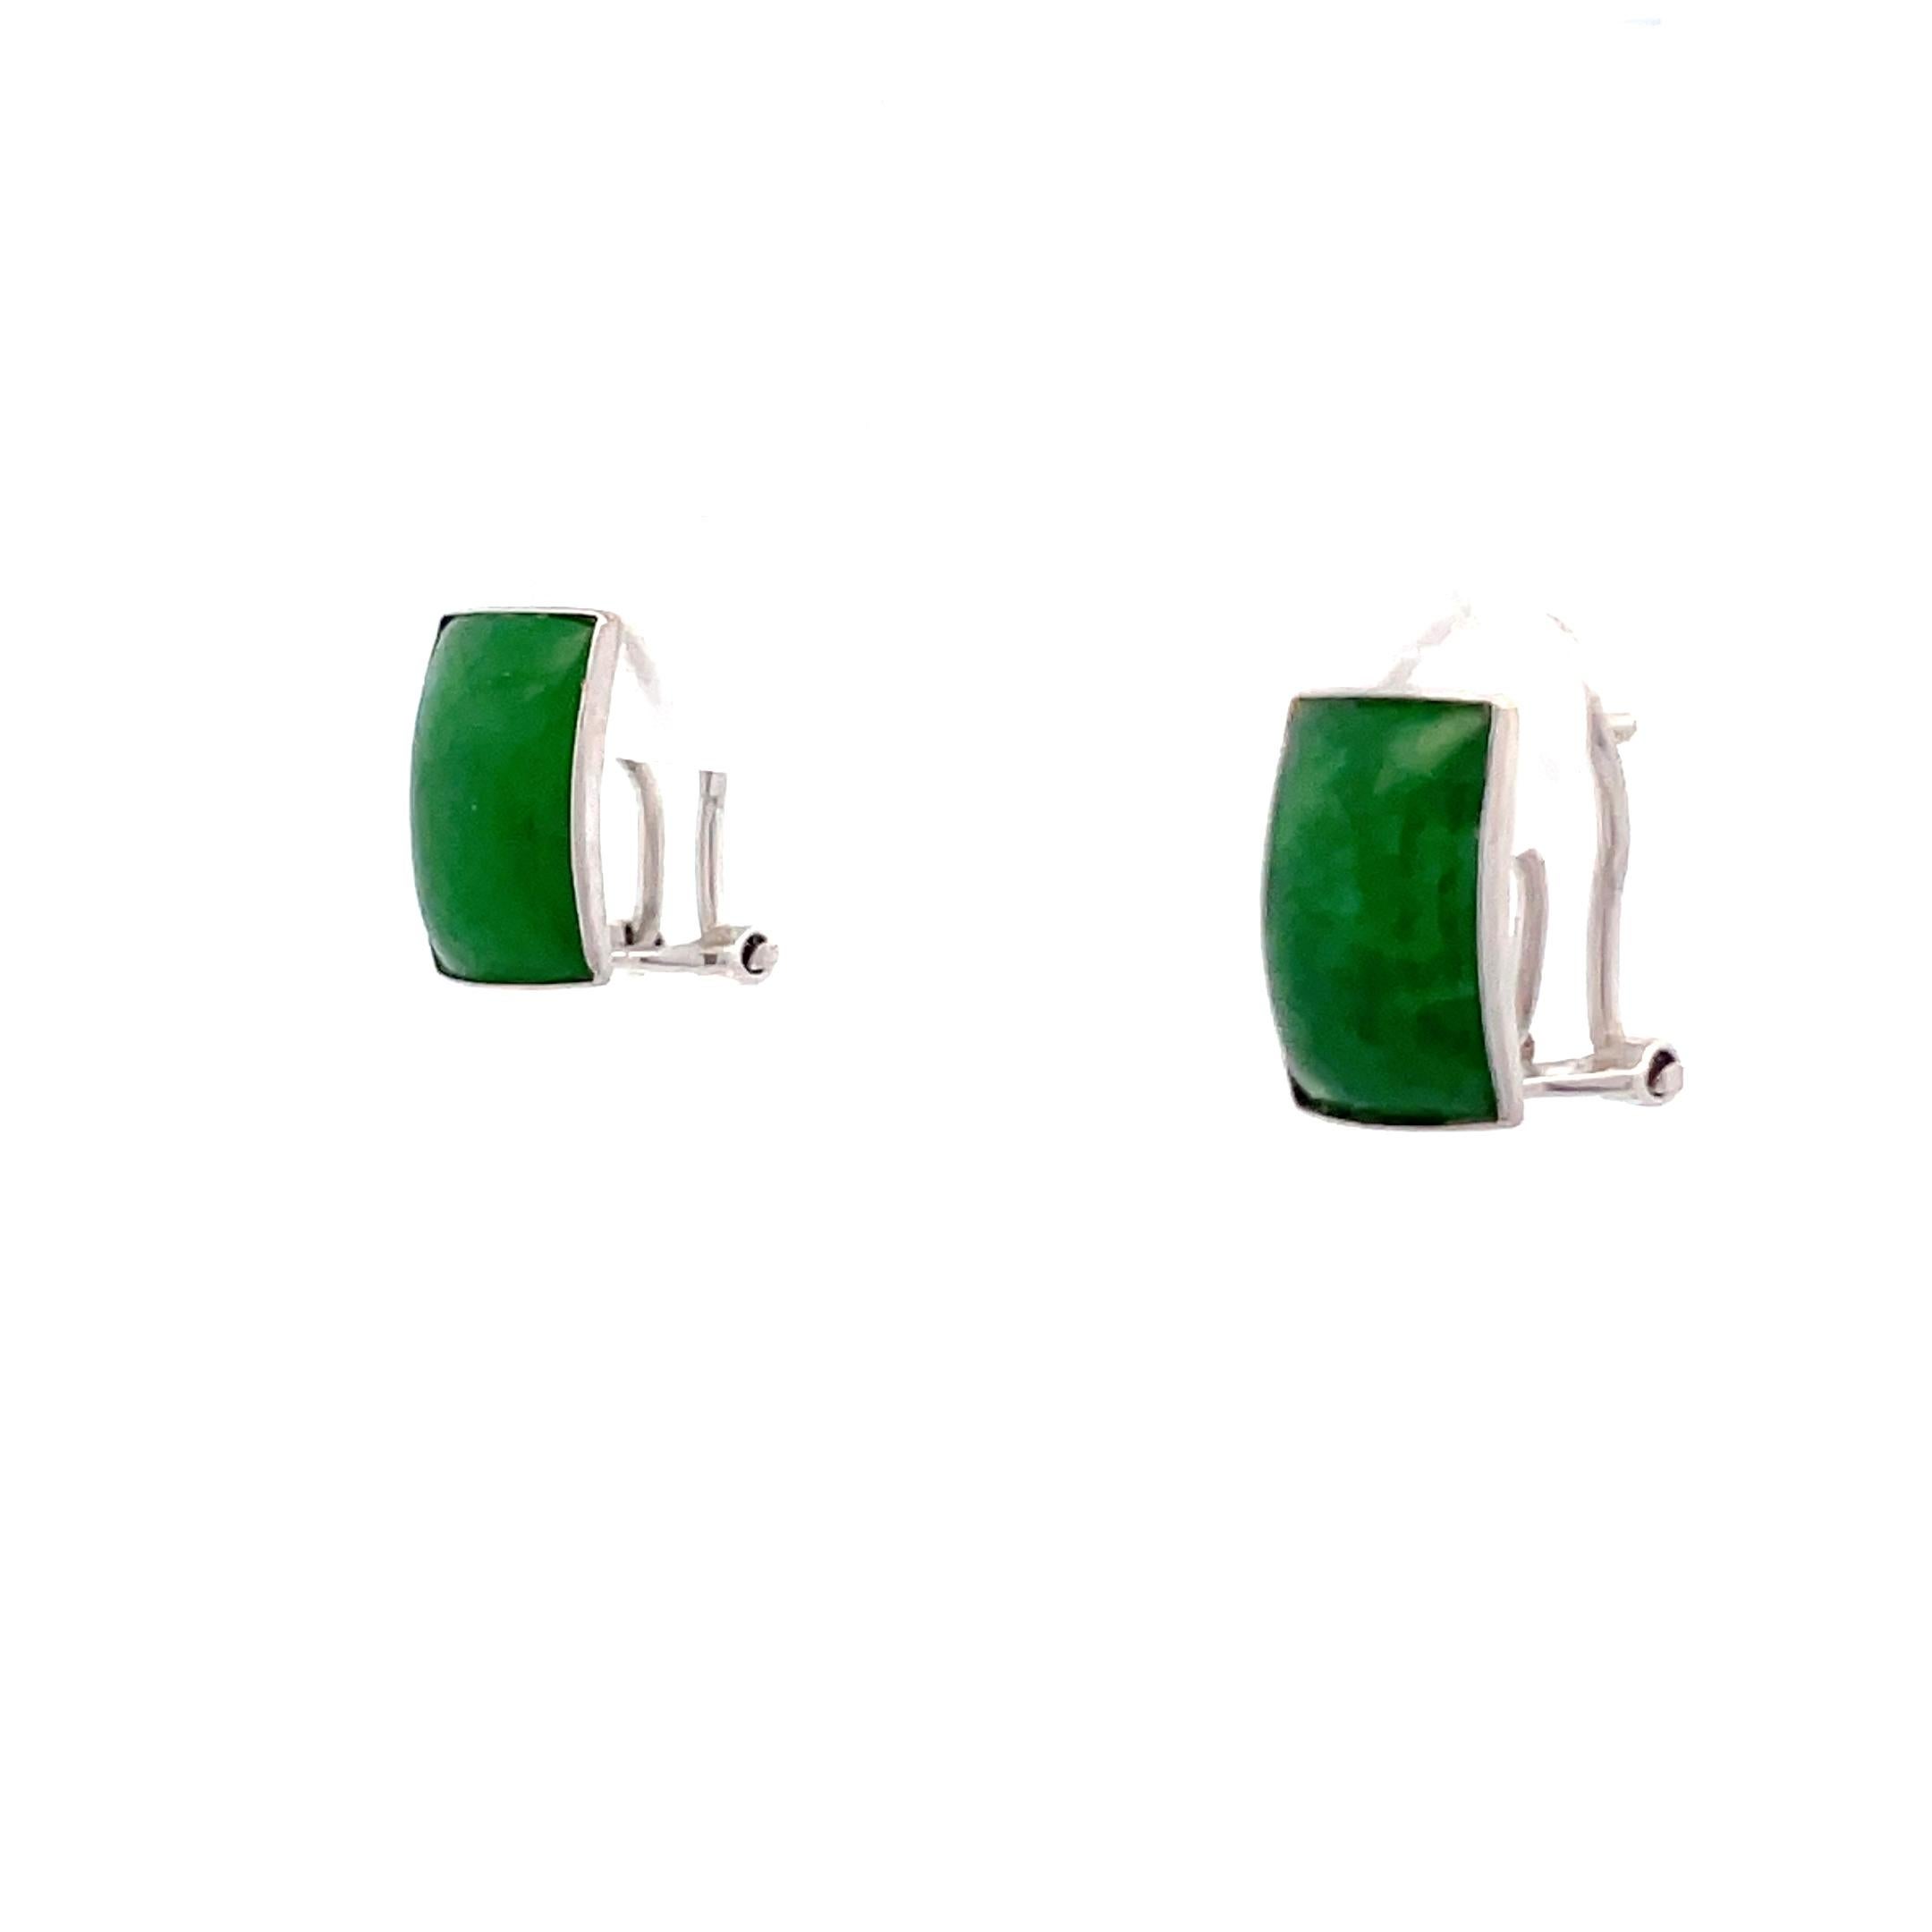 - 18K white gold 
- Bezel set 10.8mmx7.8mm Jade 
- Lever-back design 
- 3.33 grams 
- 1960s 

This is a beautiful pair of bezel set jade lever-back earrings, made in 18k white gold, from the 1960s. The large jade in each ear is magnificent, they